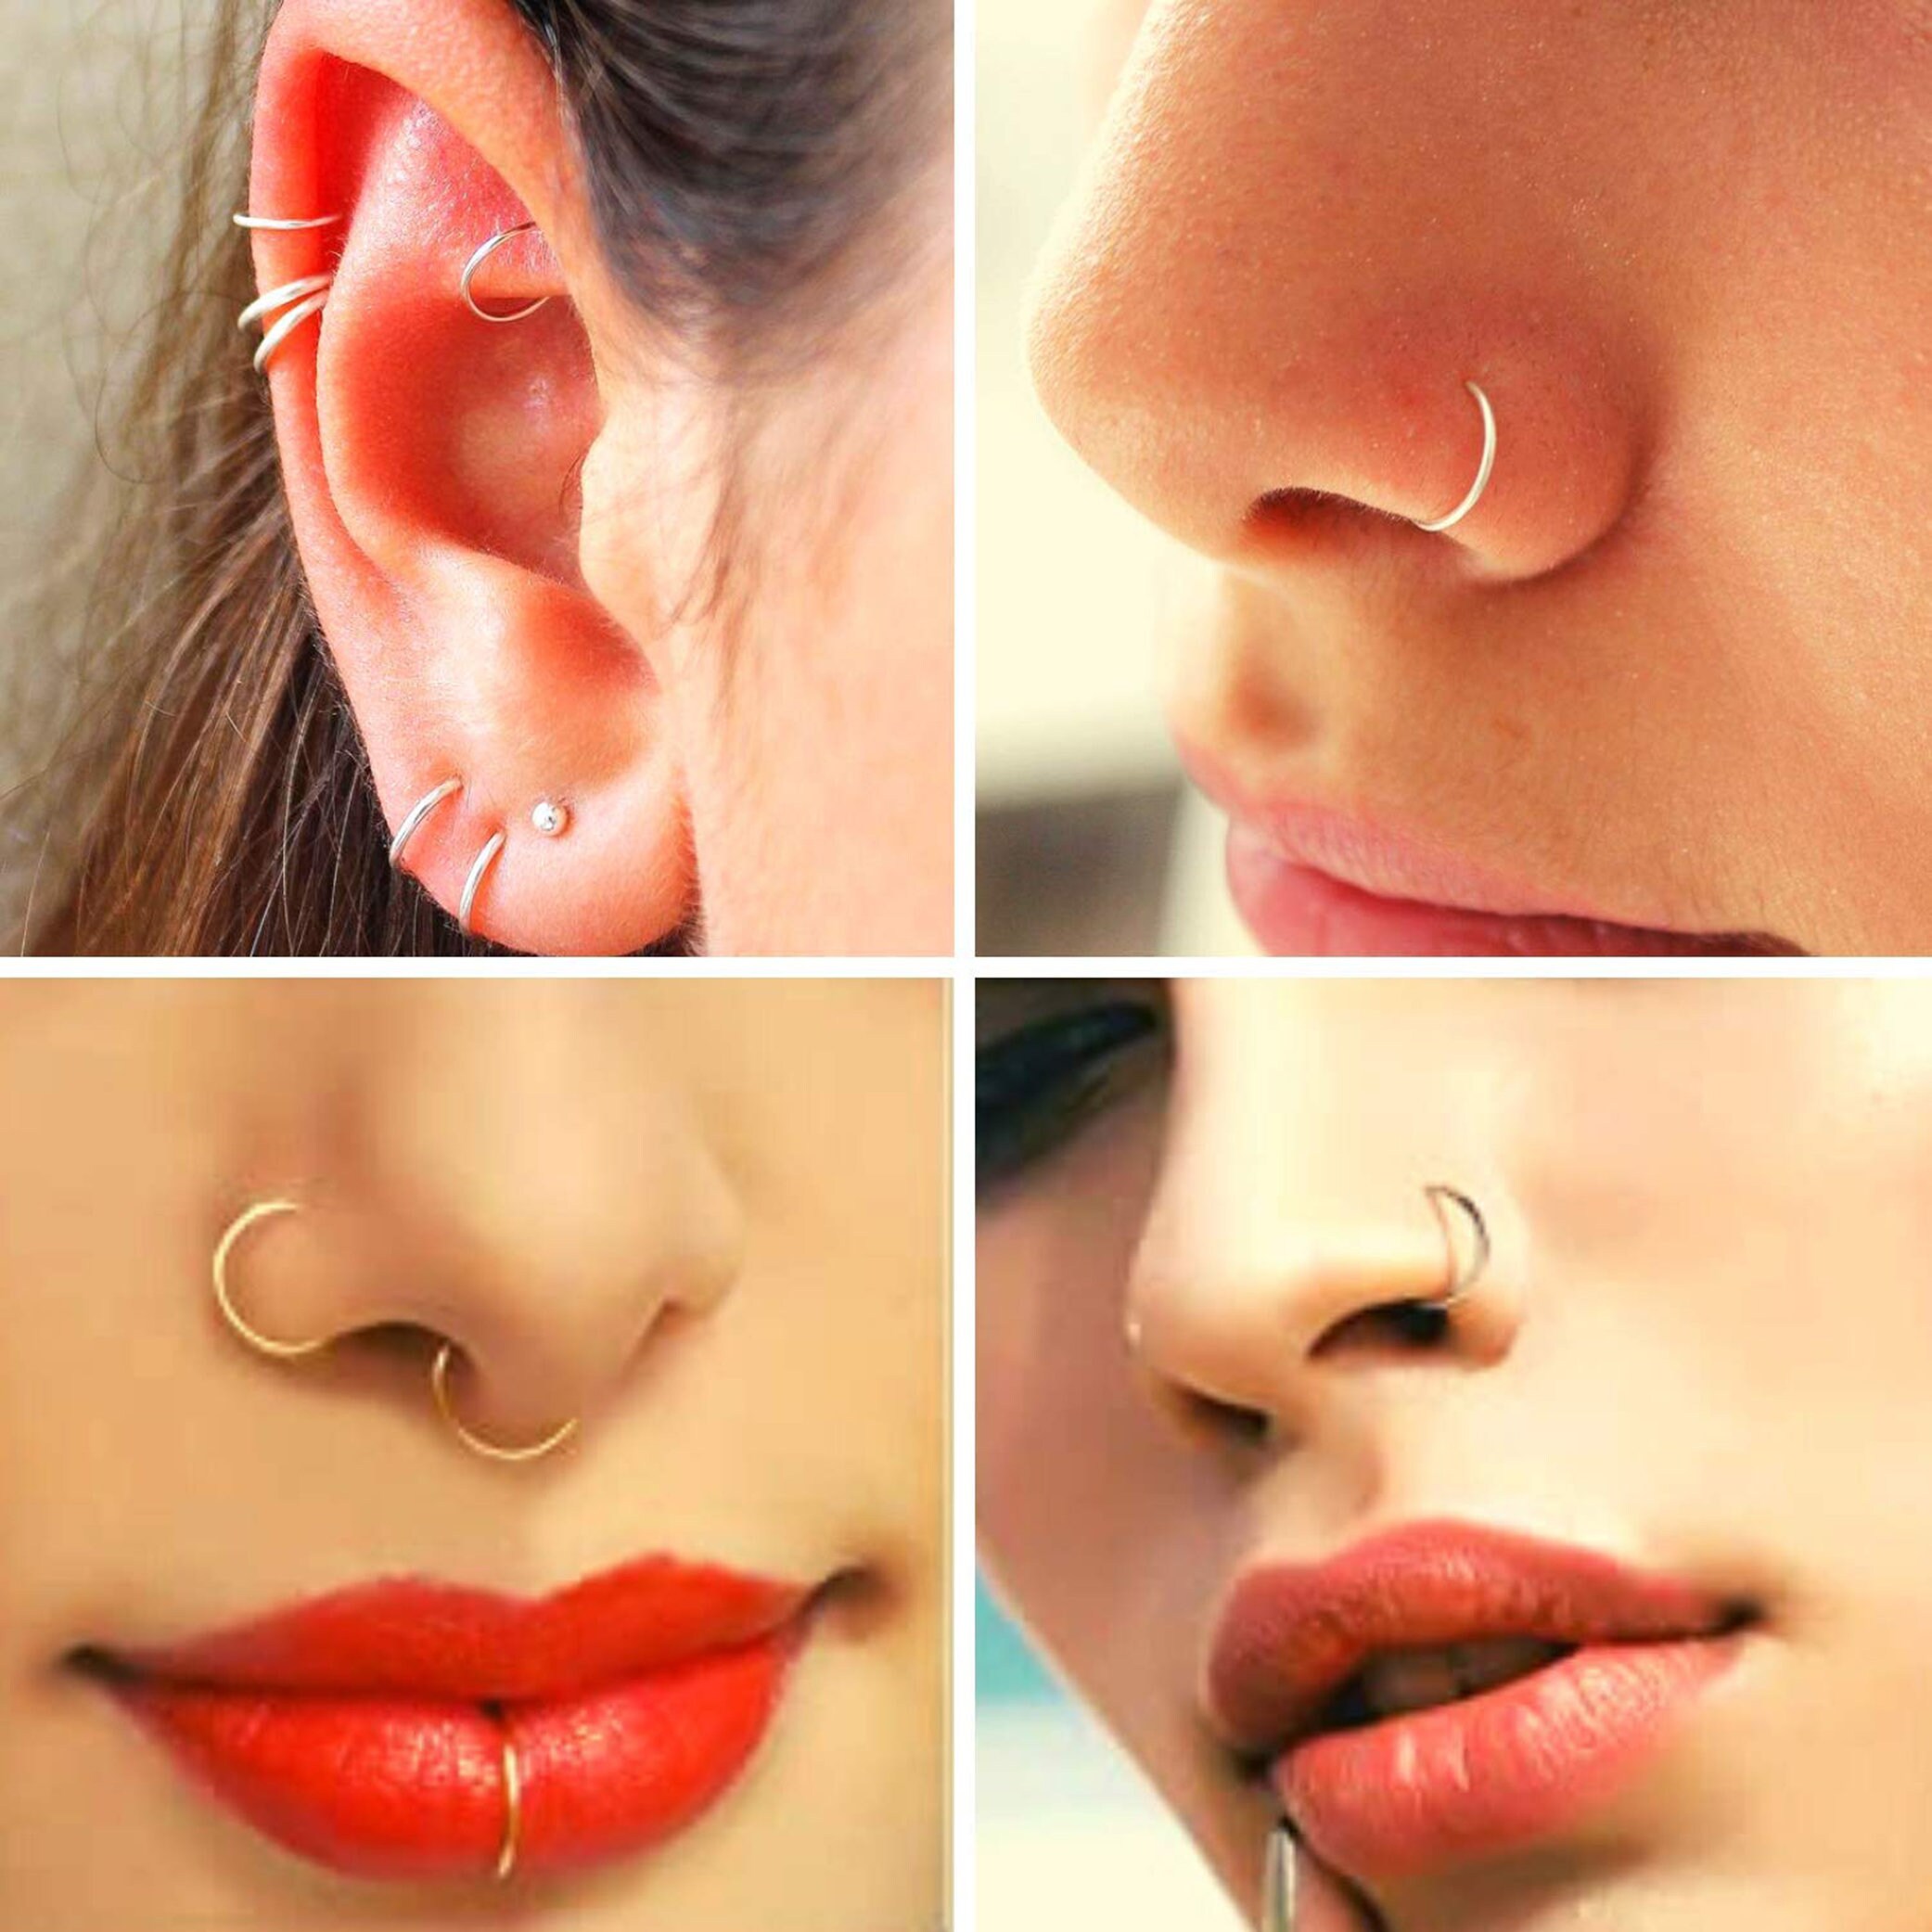 Nose Pin - Buy Latest Fancy Nose Pins starting from ₹250 | Myntra